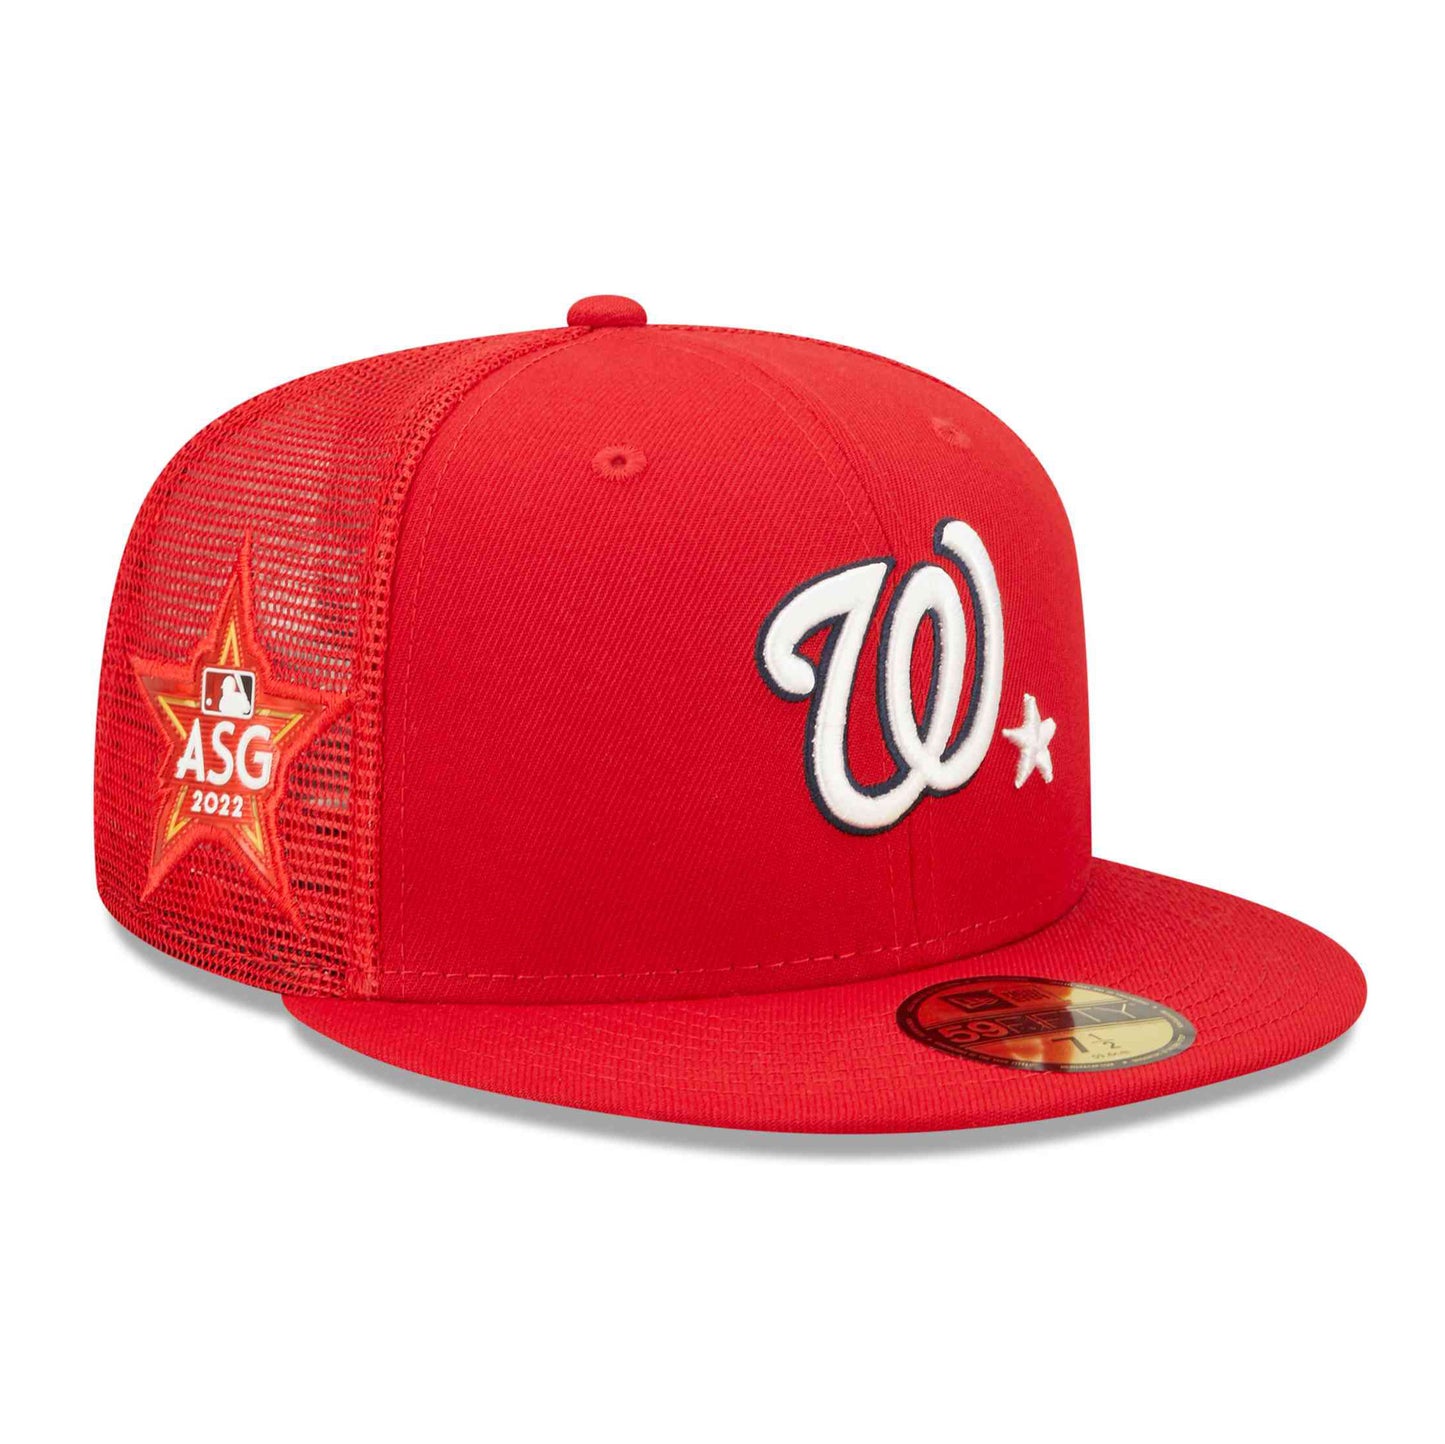 NEW ERA 59FIFTY MLB WASHINGTON NATIONALS ALL STAR GAME 2022 RED / TROPIC RED UV FITTED TRUCKER CAP